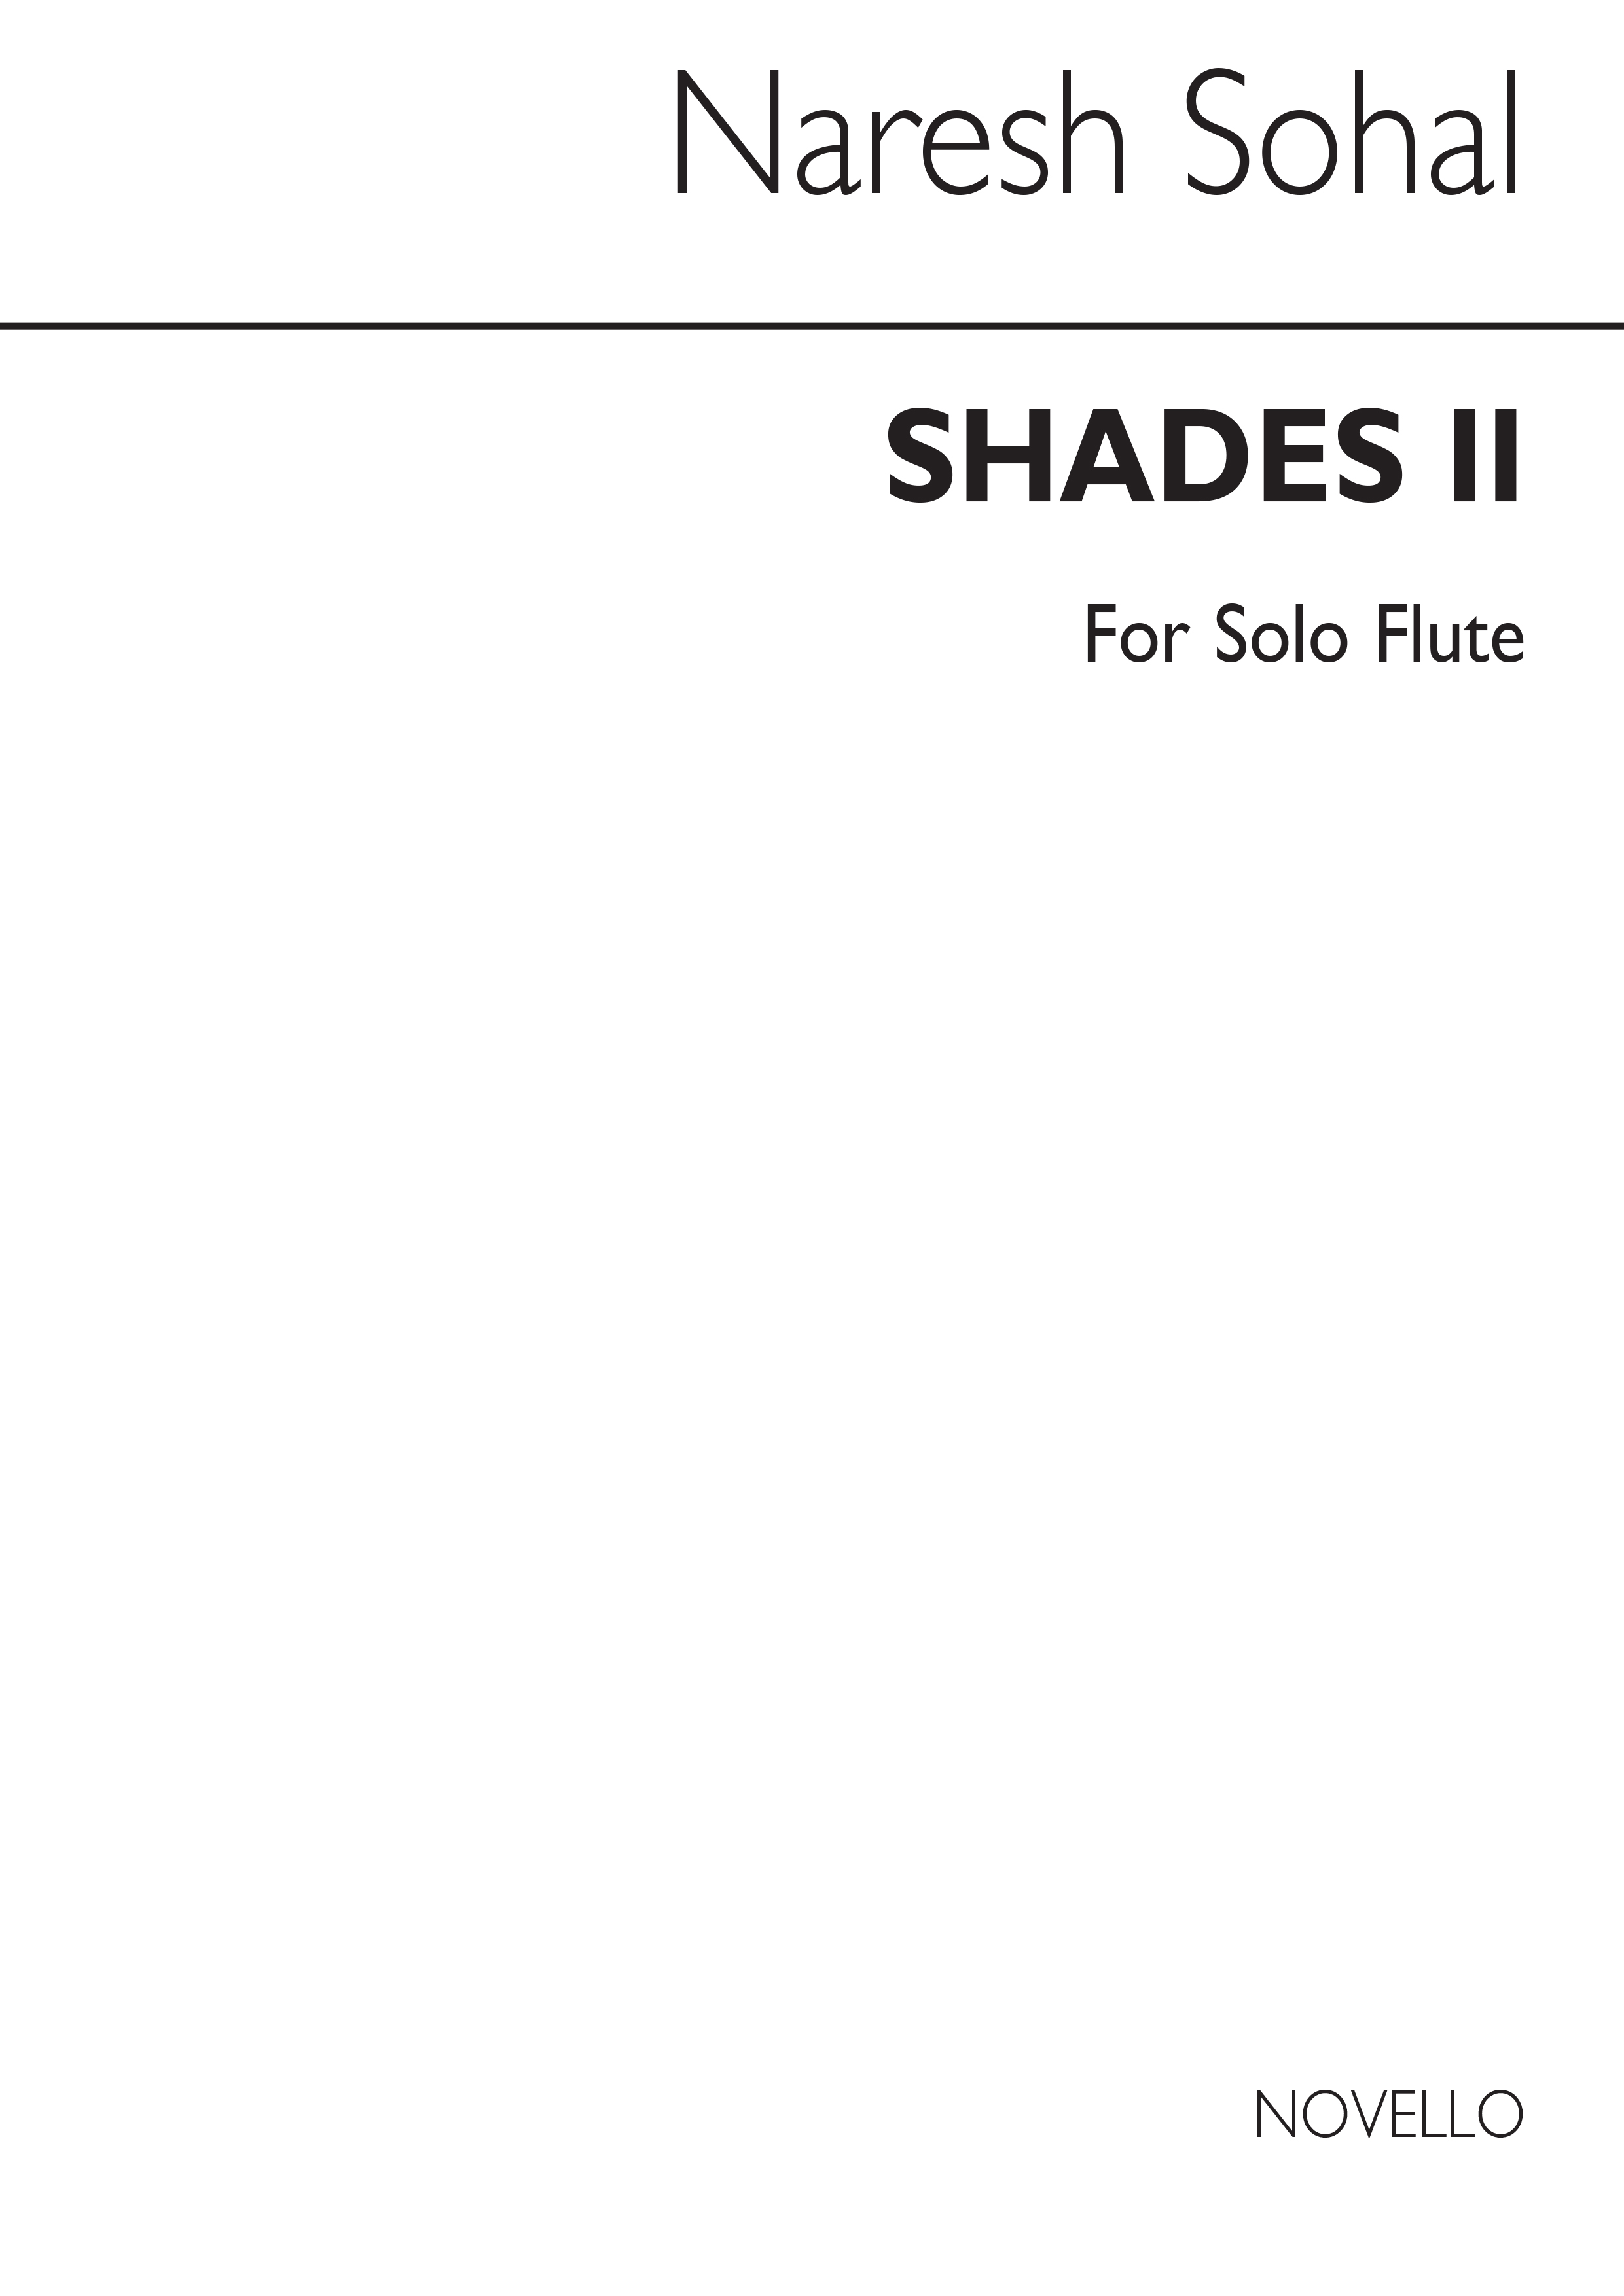 Sohal: Shades II for Solo Flute